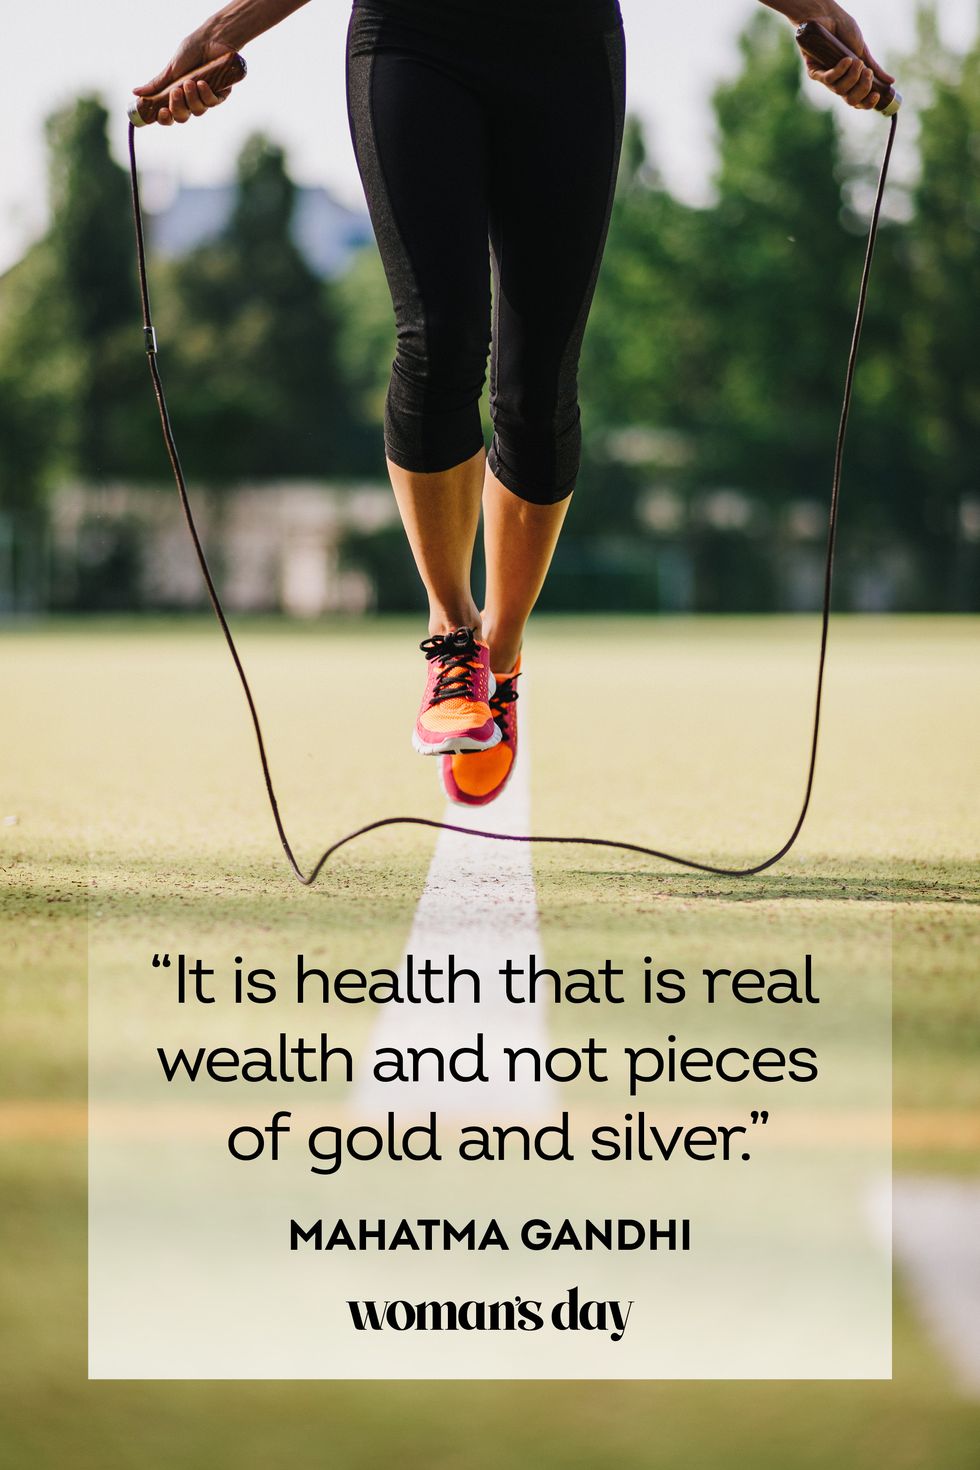 101 Best Health and Fitness Quotes - Healthy Lifestyle Quotes